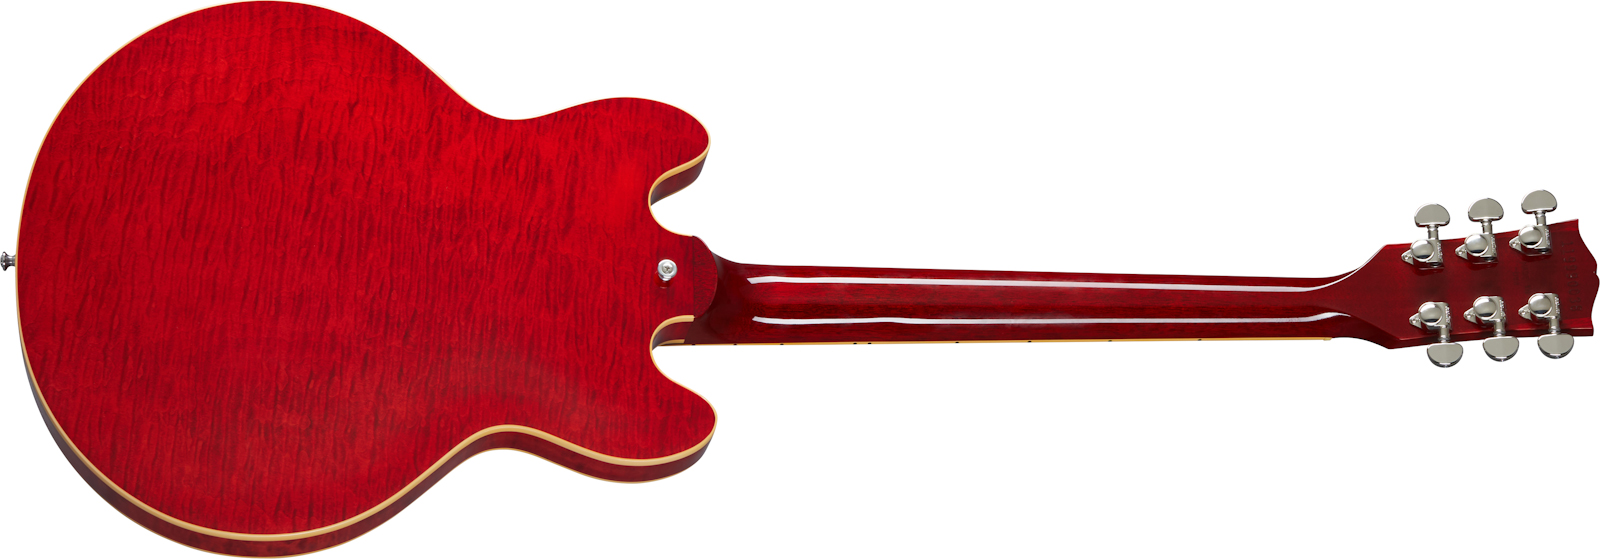 Gibson ES-339 Figured - sixties cherry Semi-hollow electric guitar red